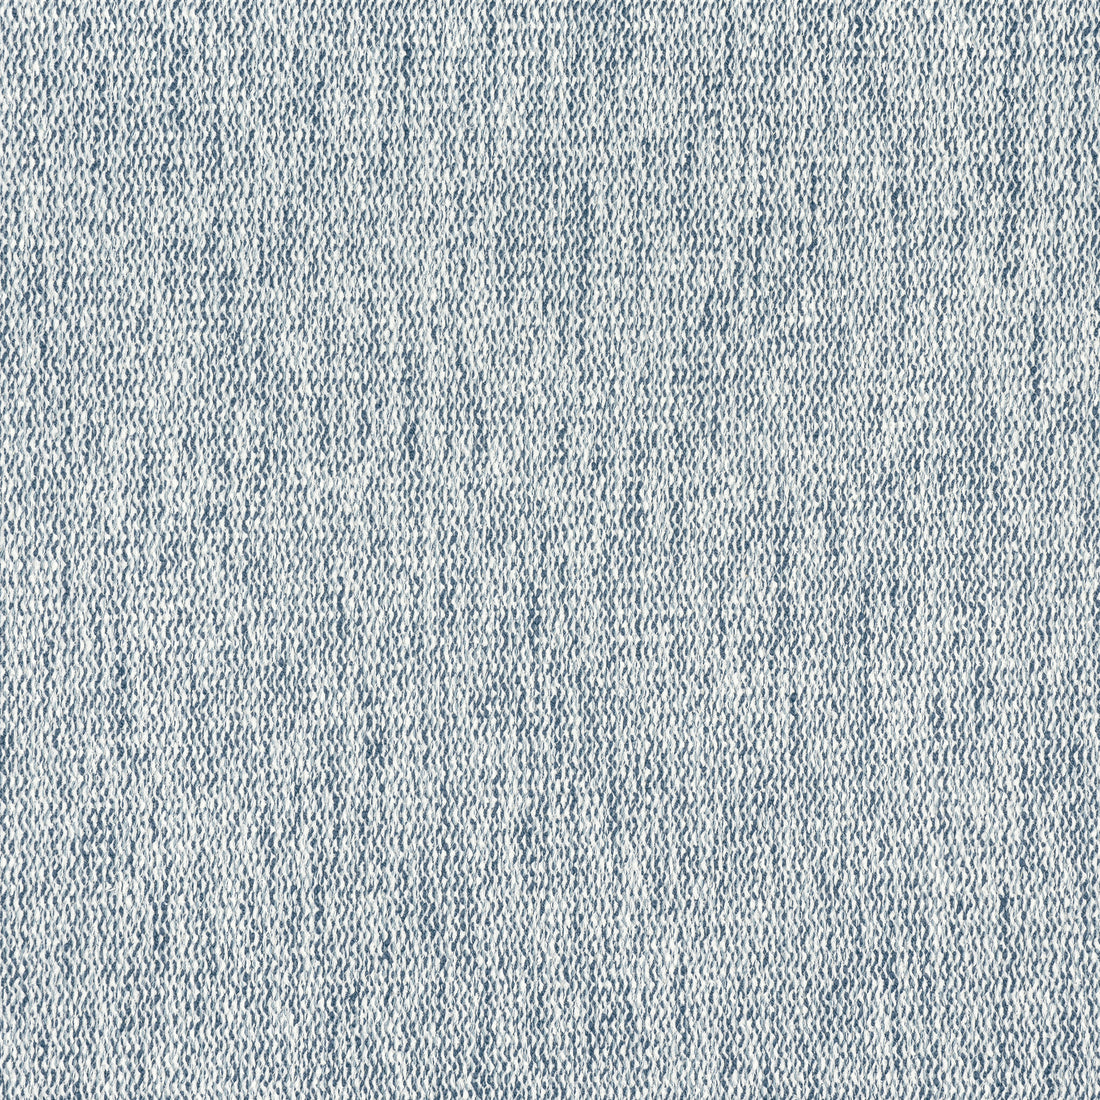 Arroyo fabric in admiral color - pattern number W8786 - by Thibaut in the Haven Textures collection